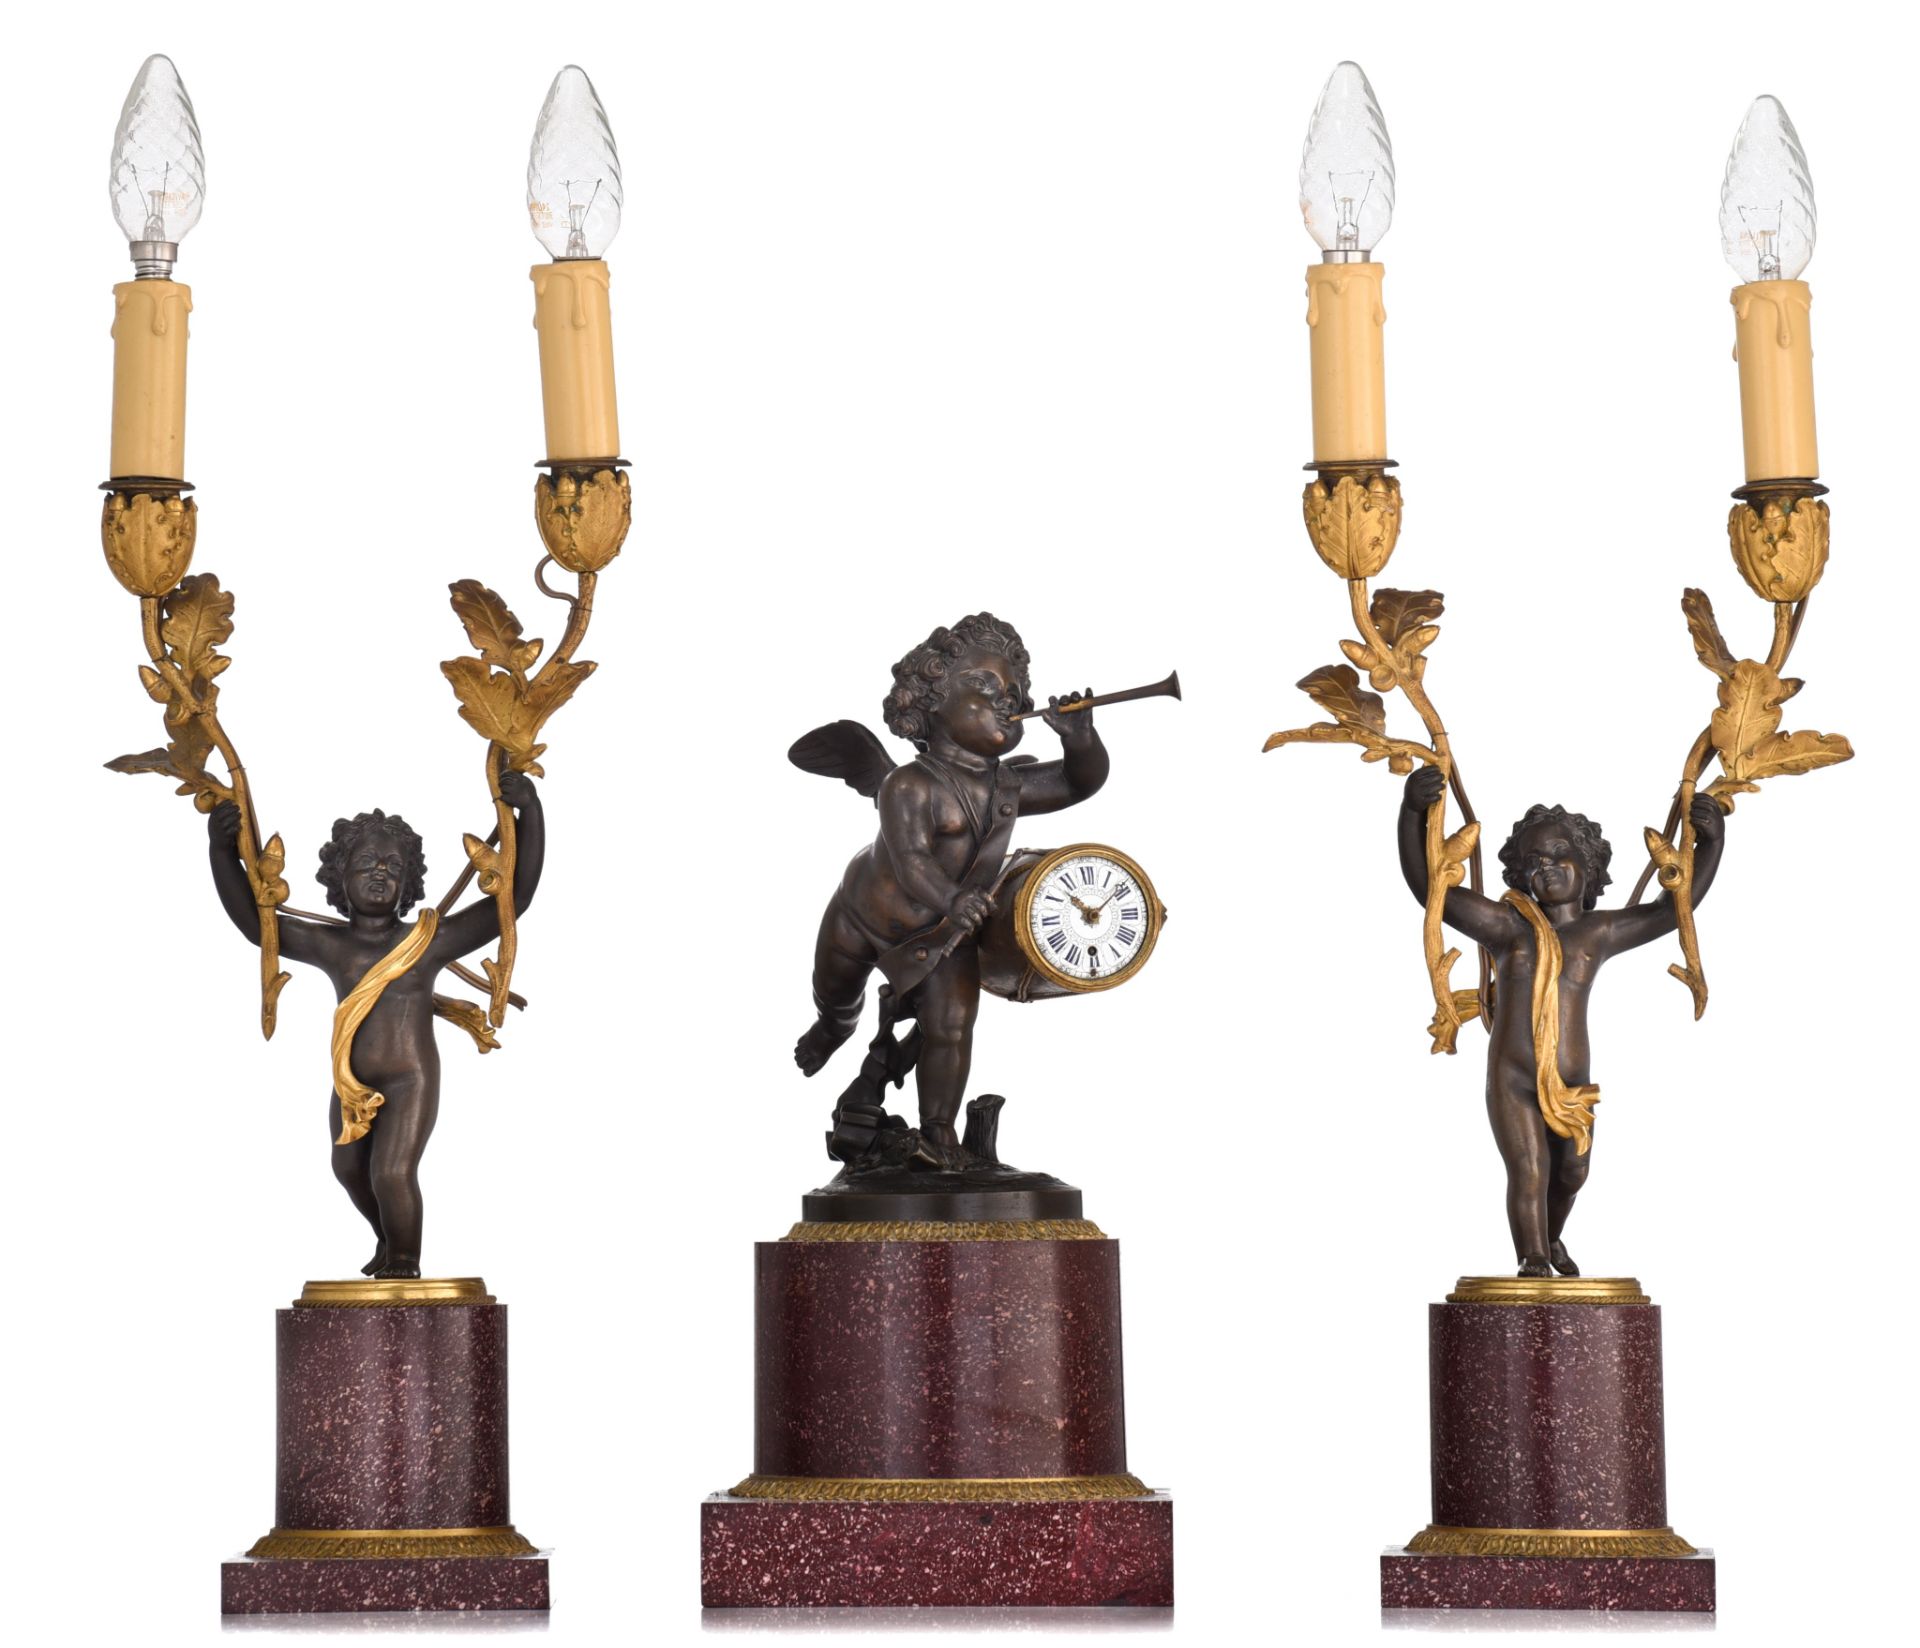 A fine Empire three-piece clock garniture, patinated and gilt bronze on rouge Napoleon marble, signe